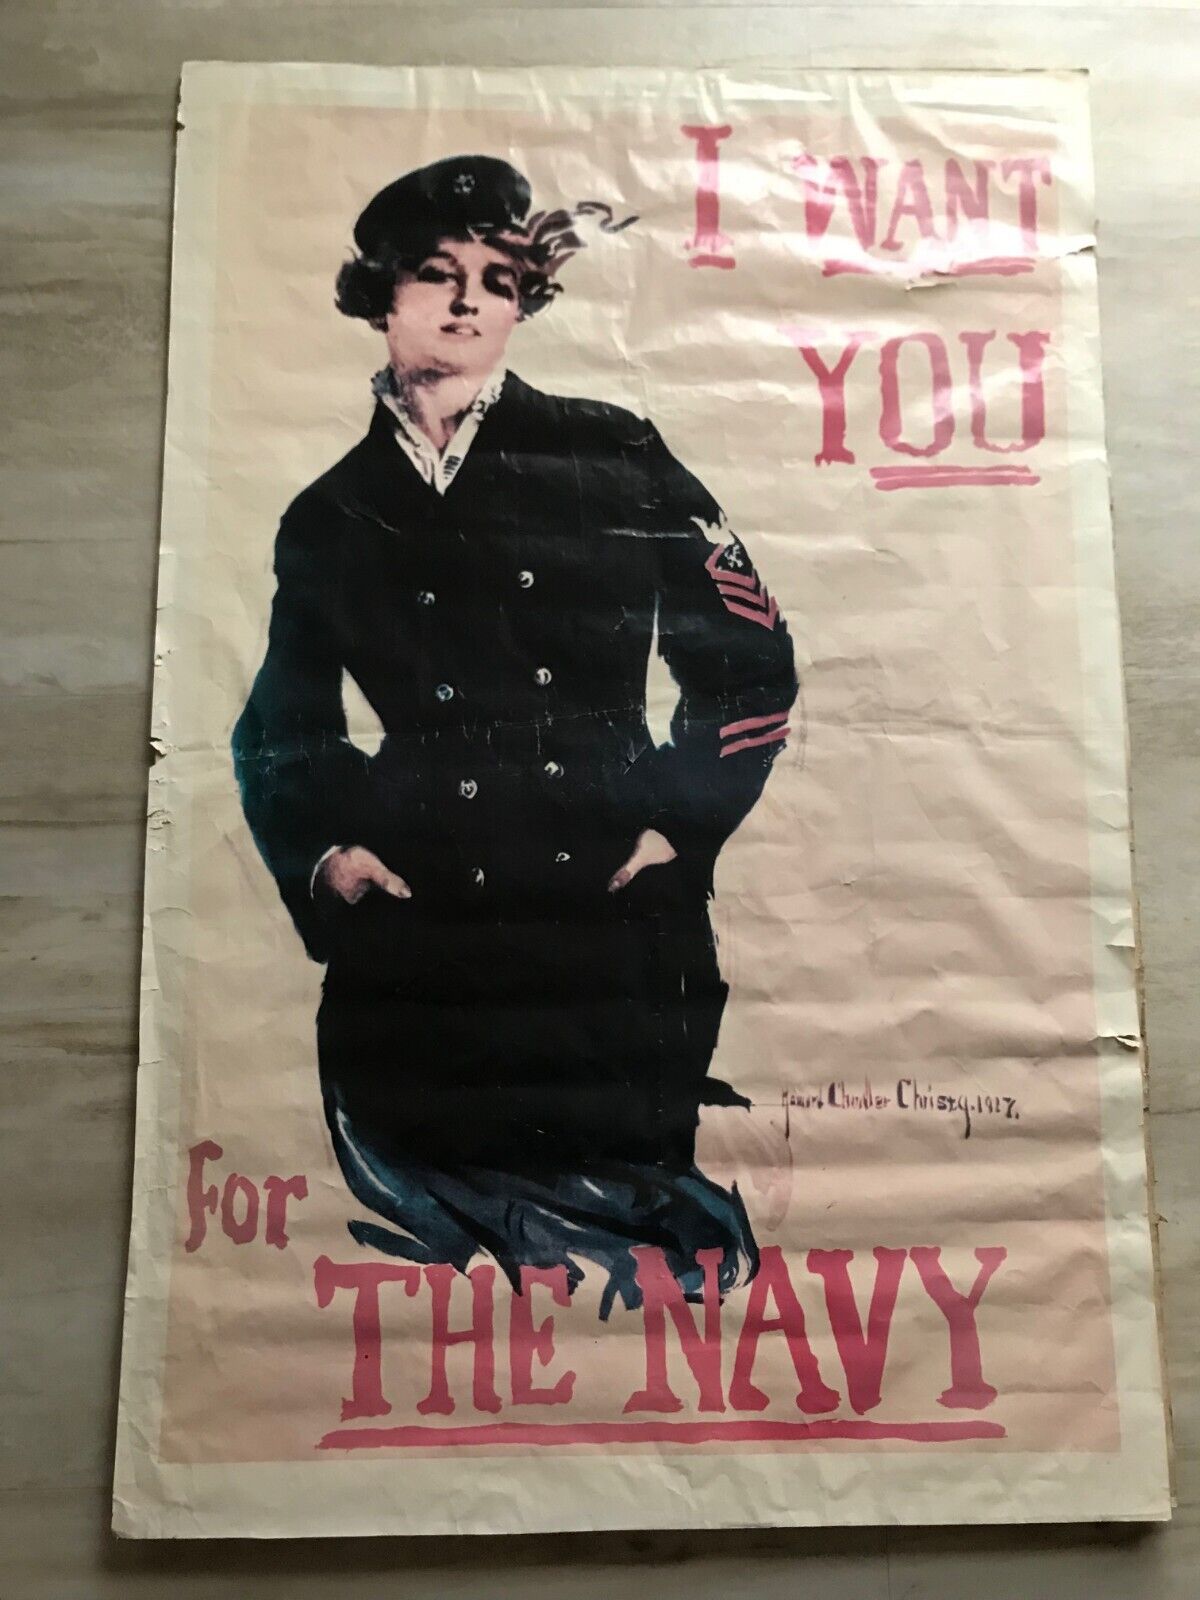 2 Original 1973 U.S. Navy Recruiting Posters From Rockville MD Old Post Office